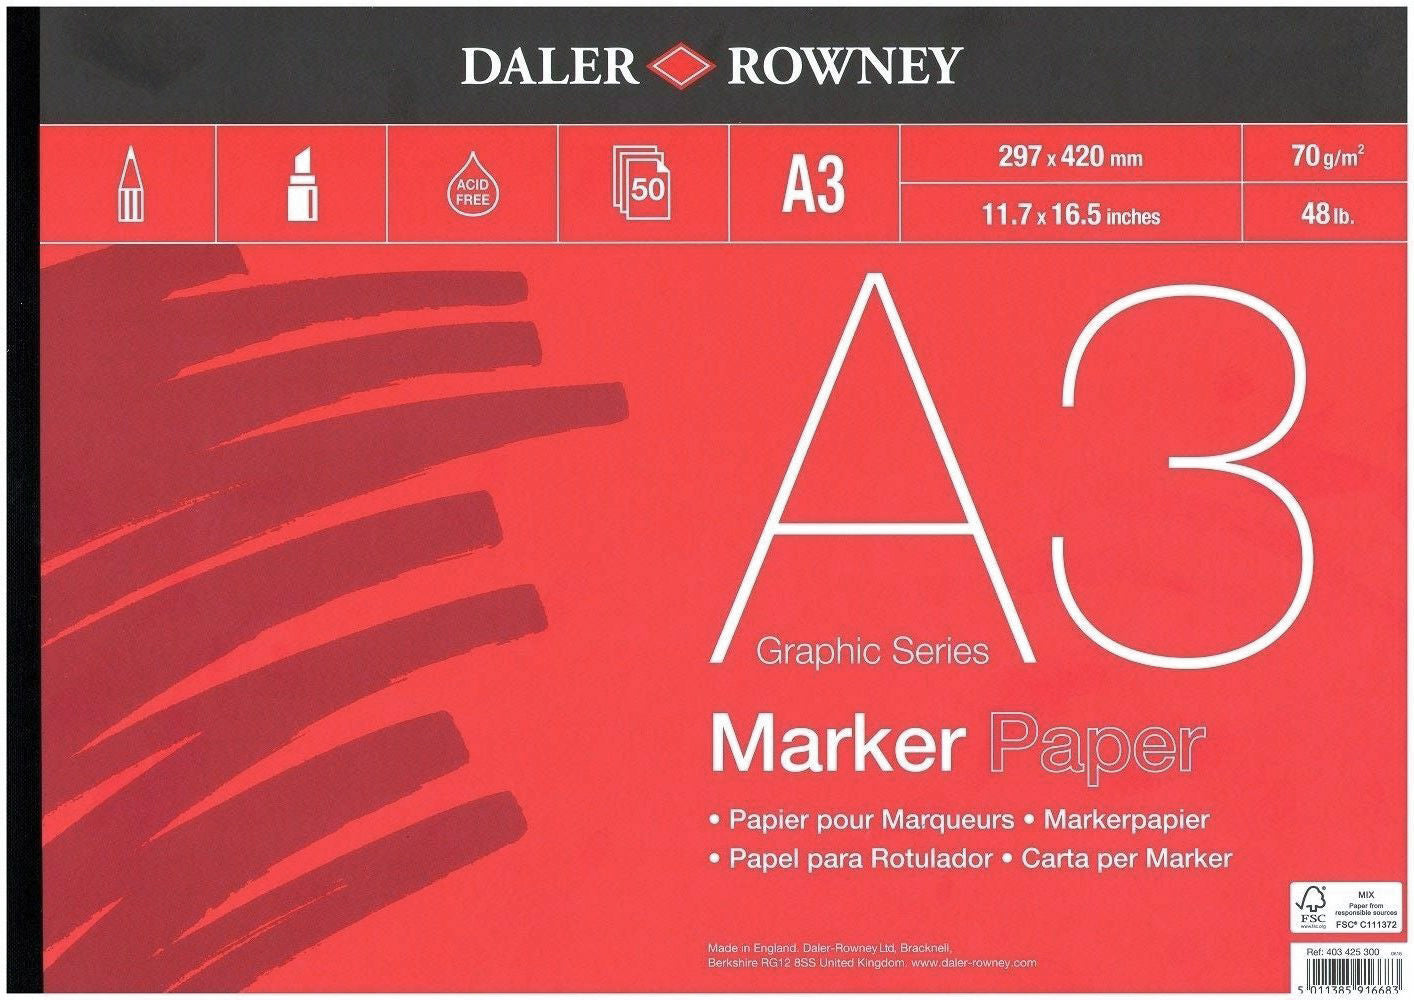 DALER SIMPLY MARKER PAD A3